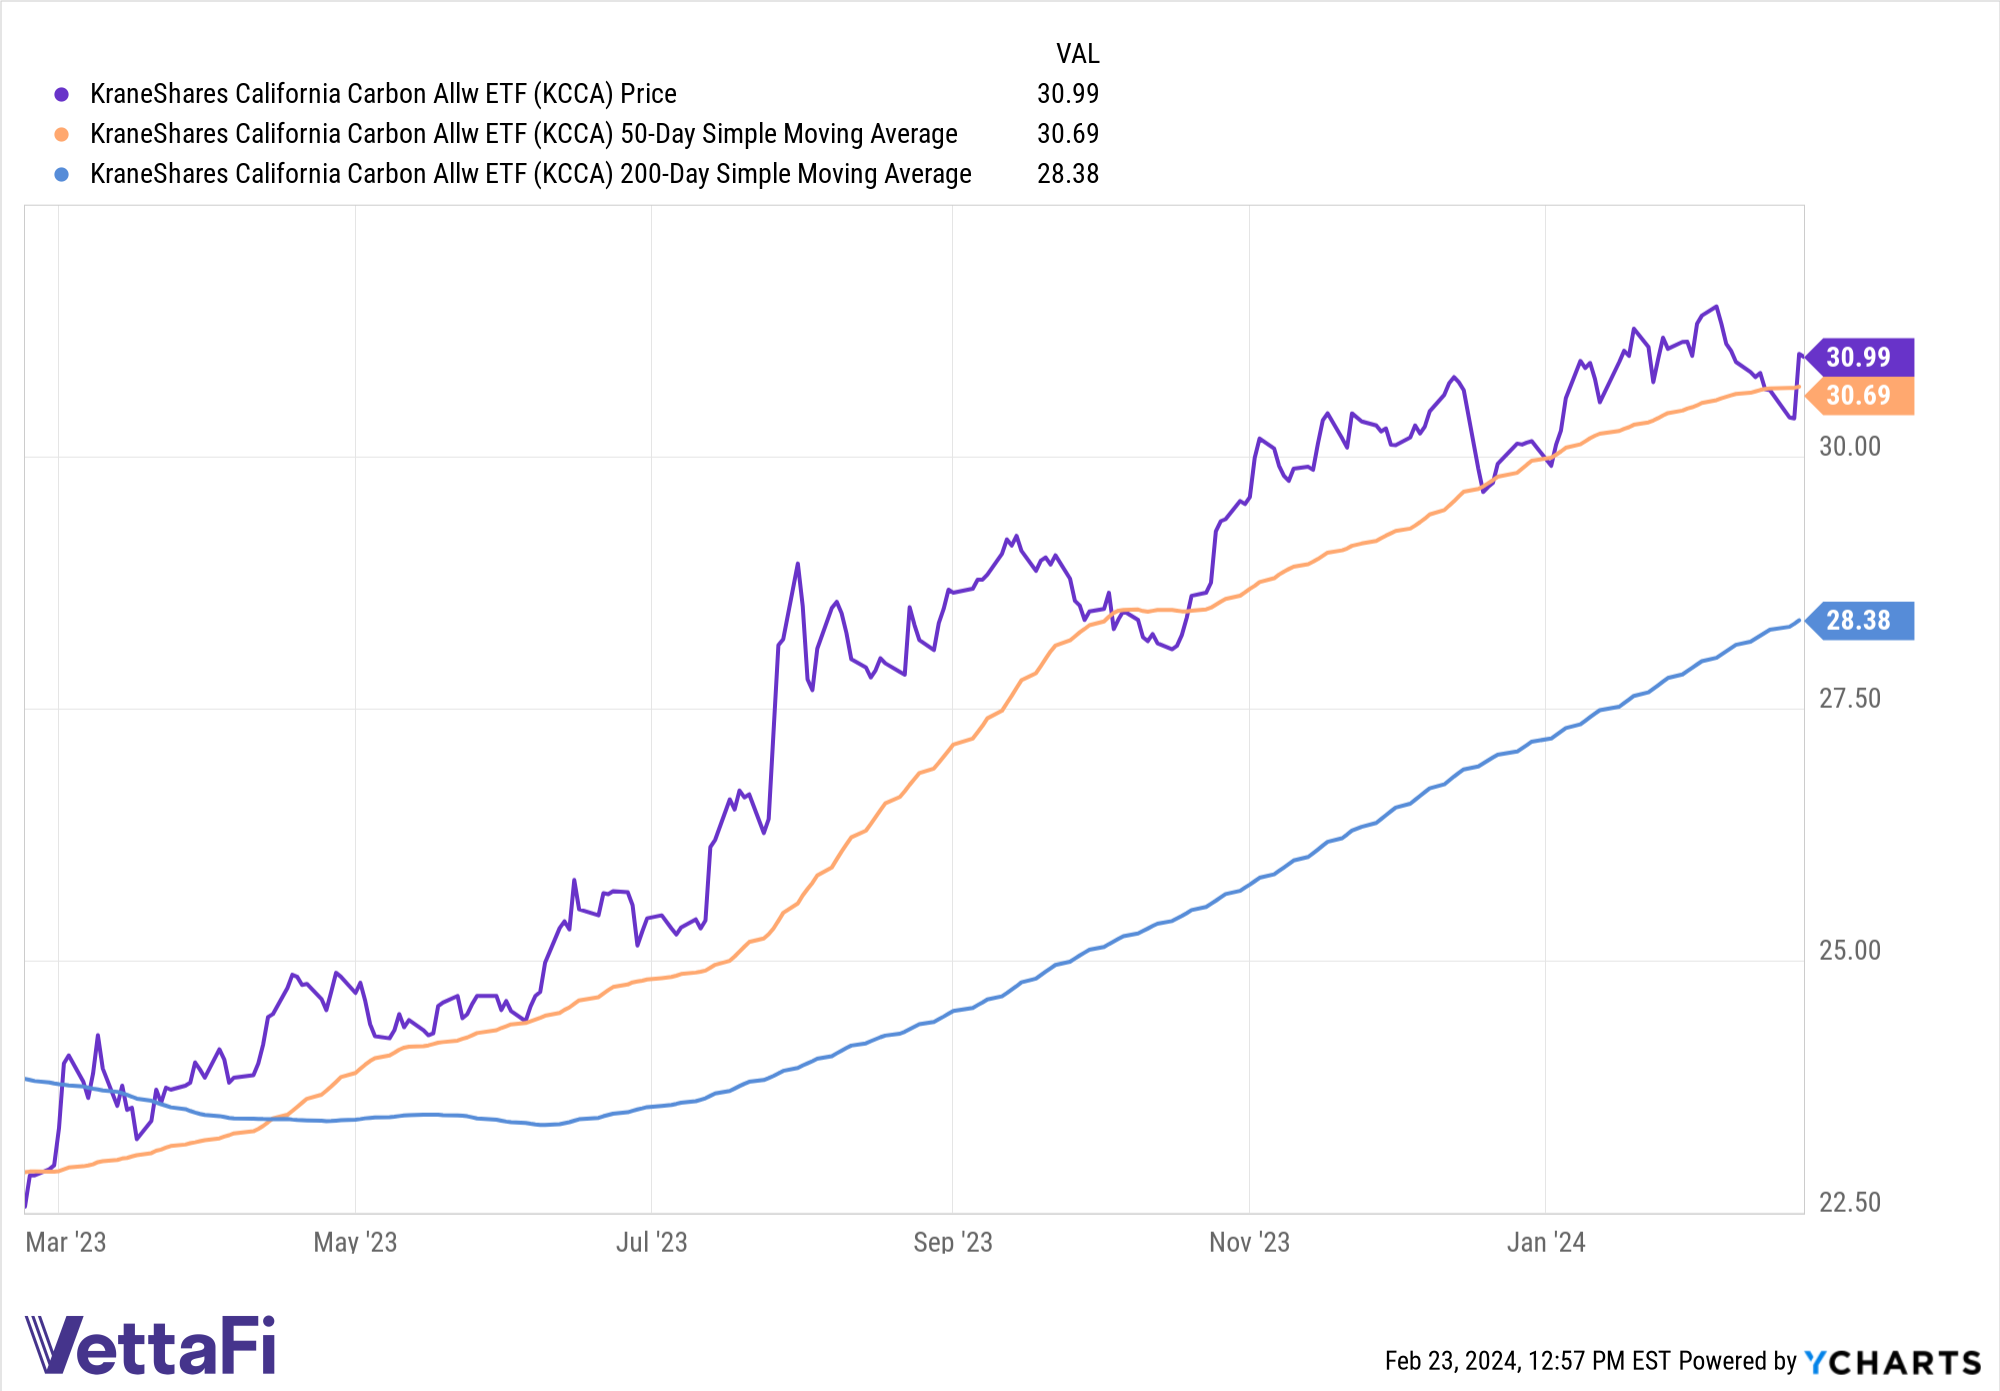 Price returns as well as the 50-day SMA and 200-day SMA for KCCA in the last 12 months. 